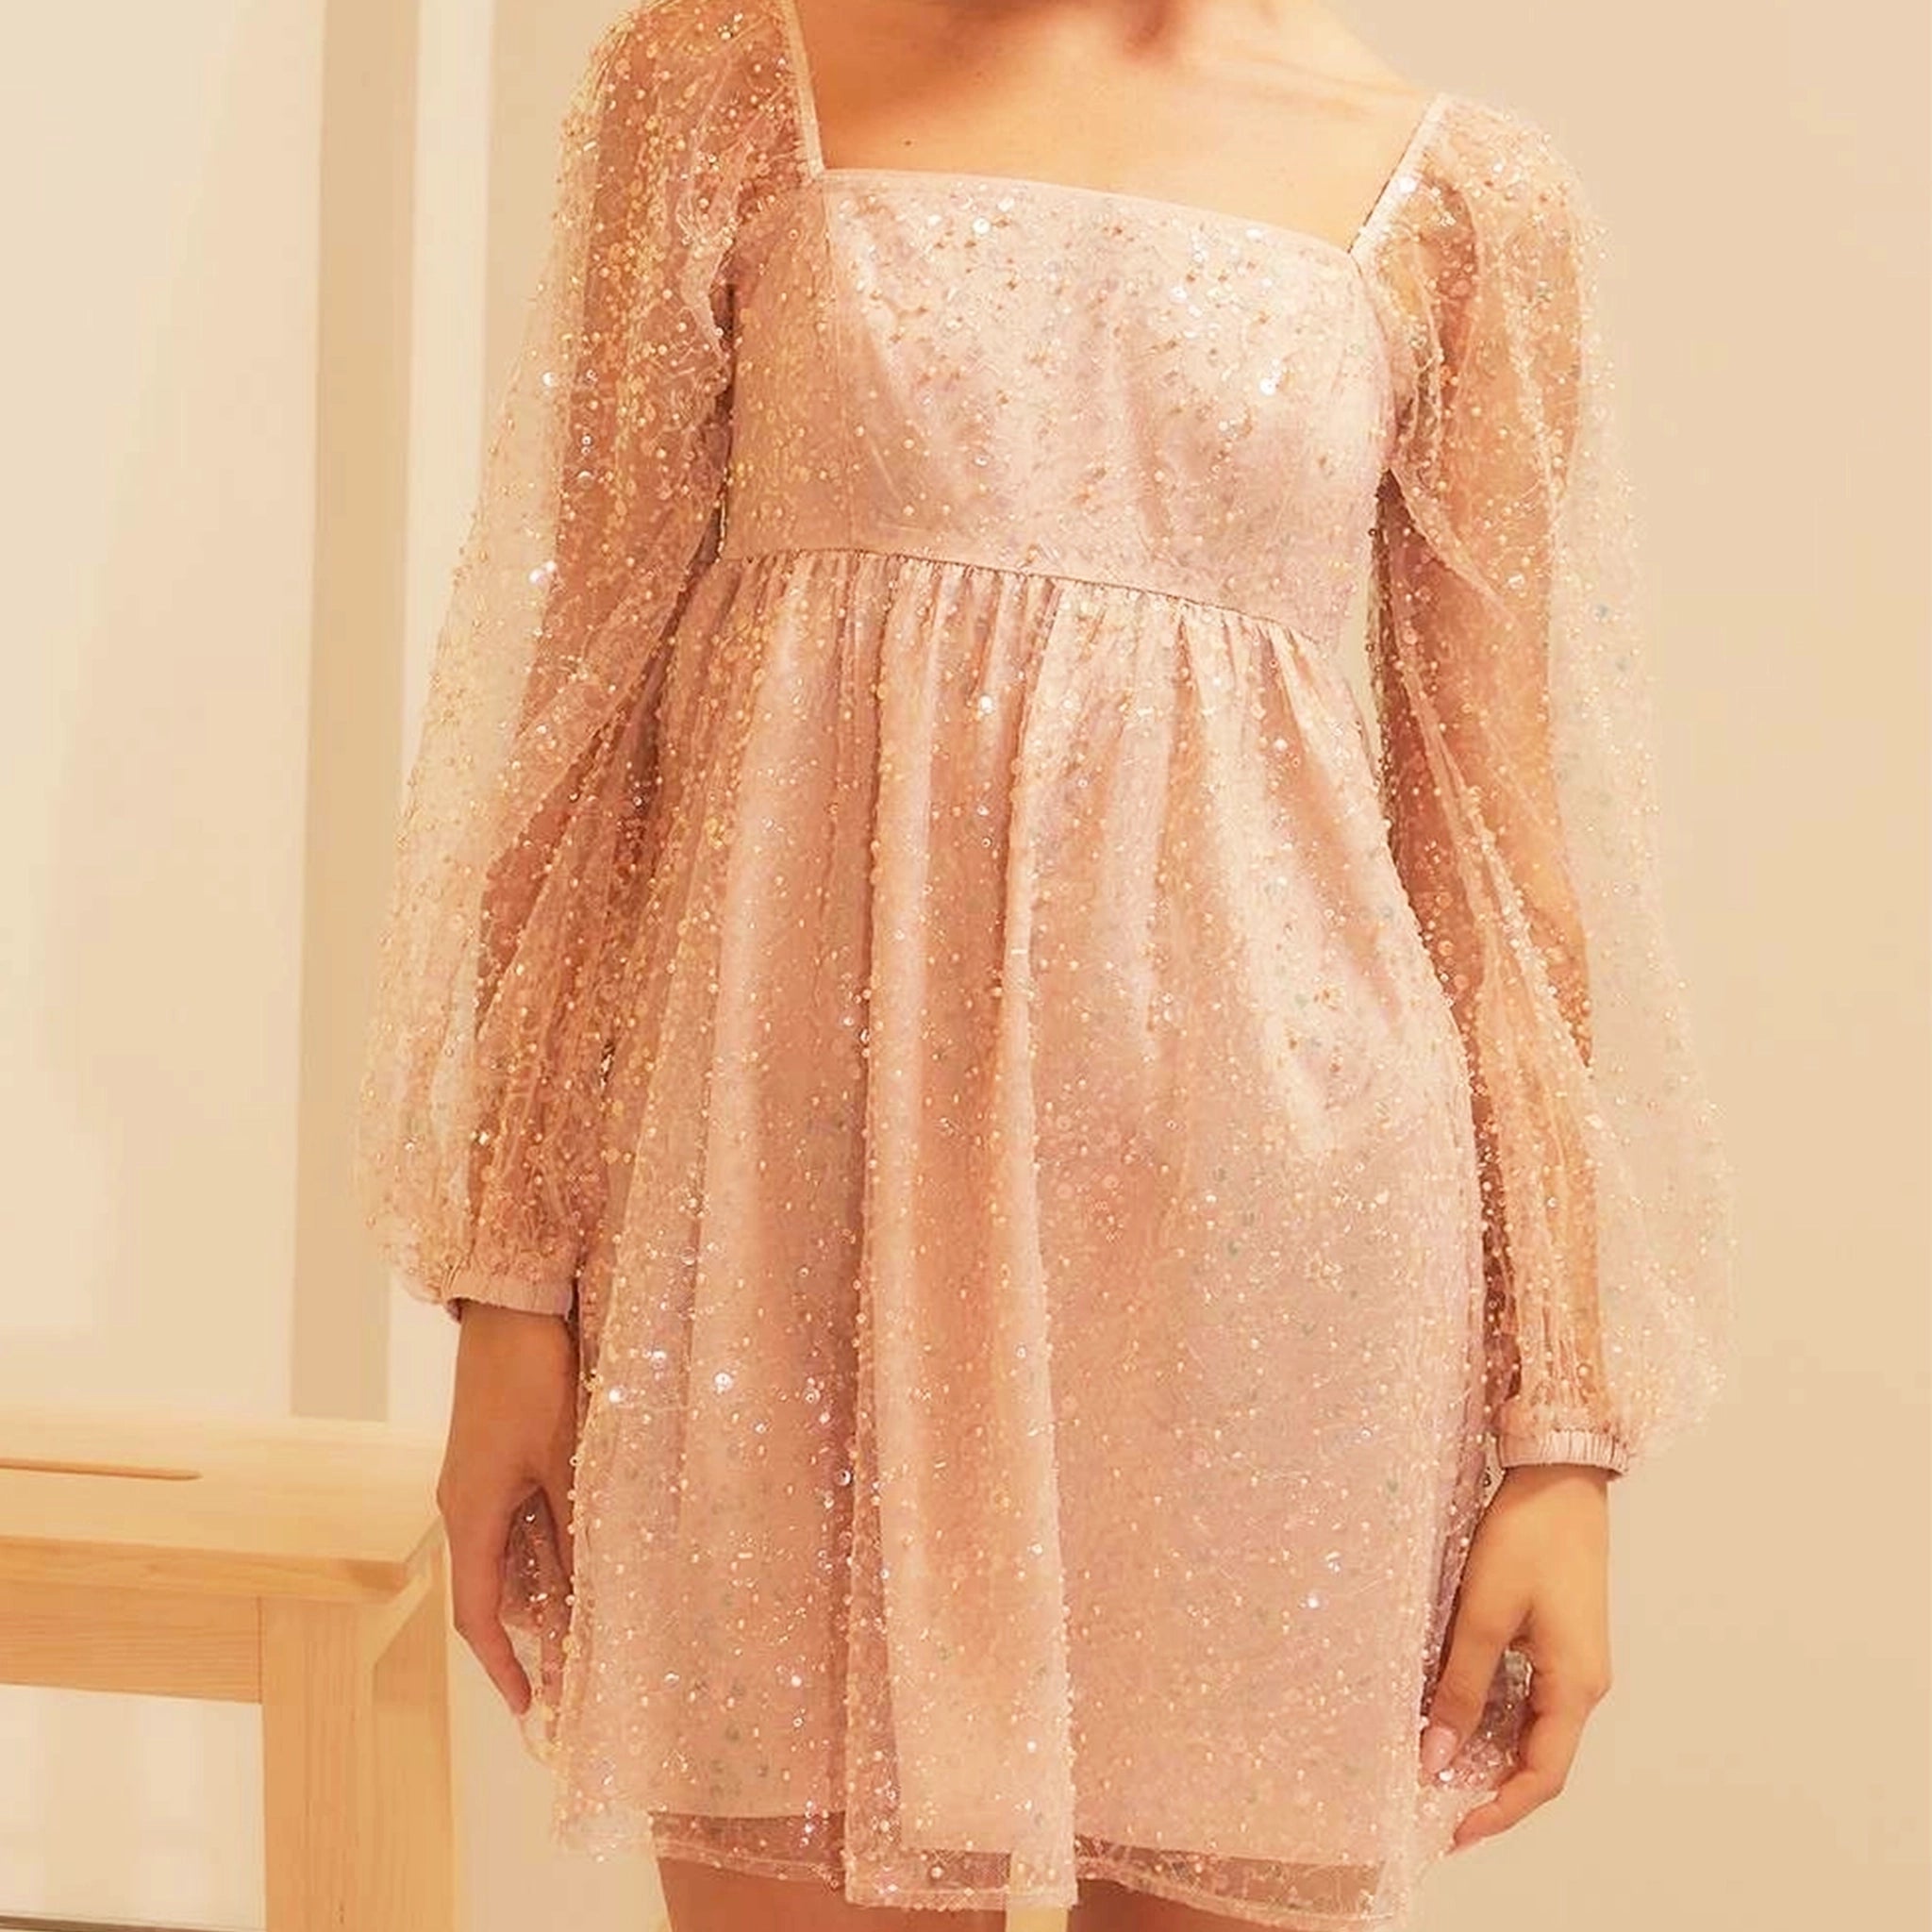 On a neutral background is a peachy pink babydoll dress with sleeves and a square neckline.